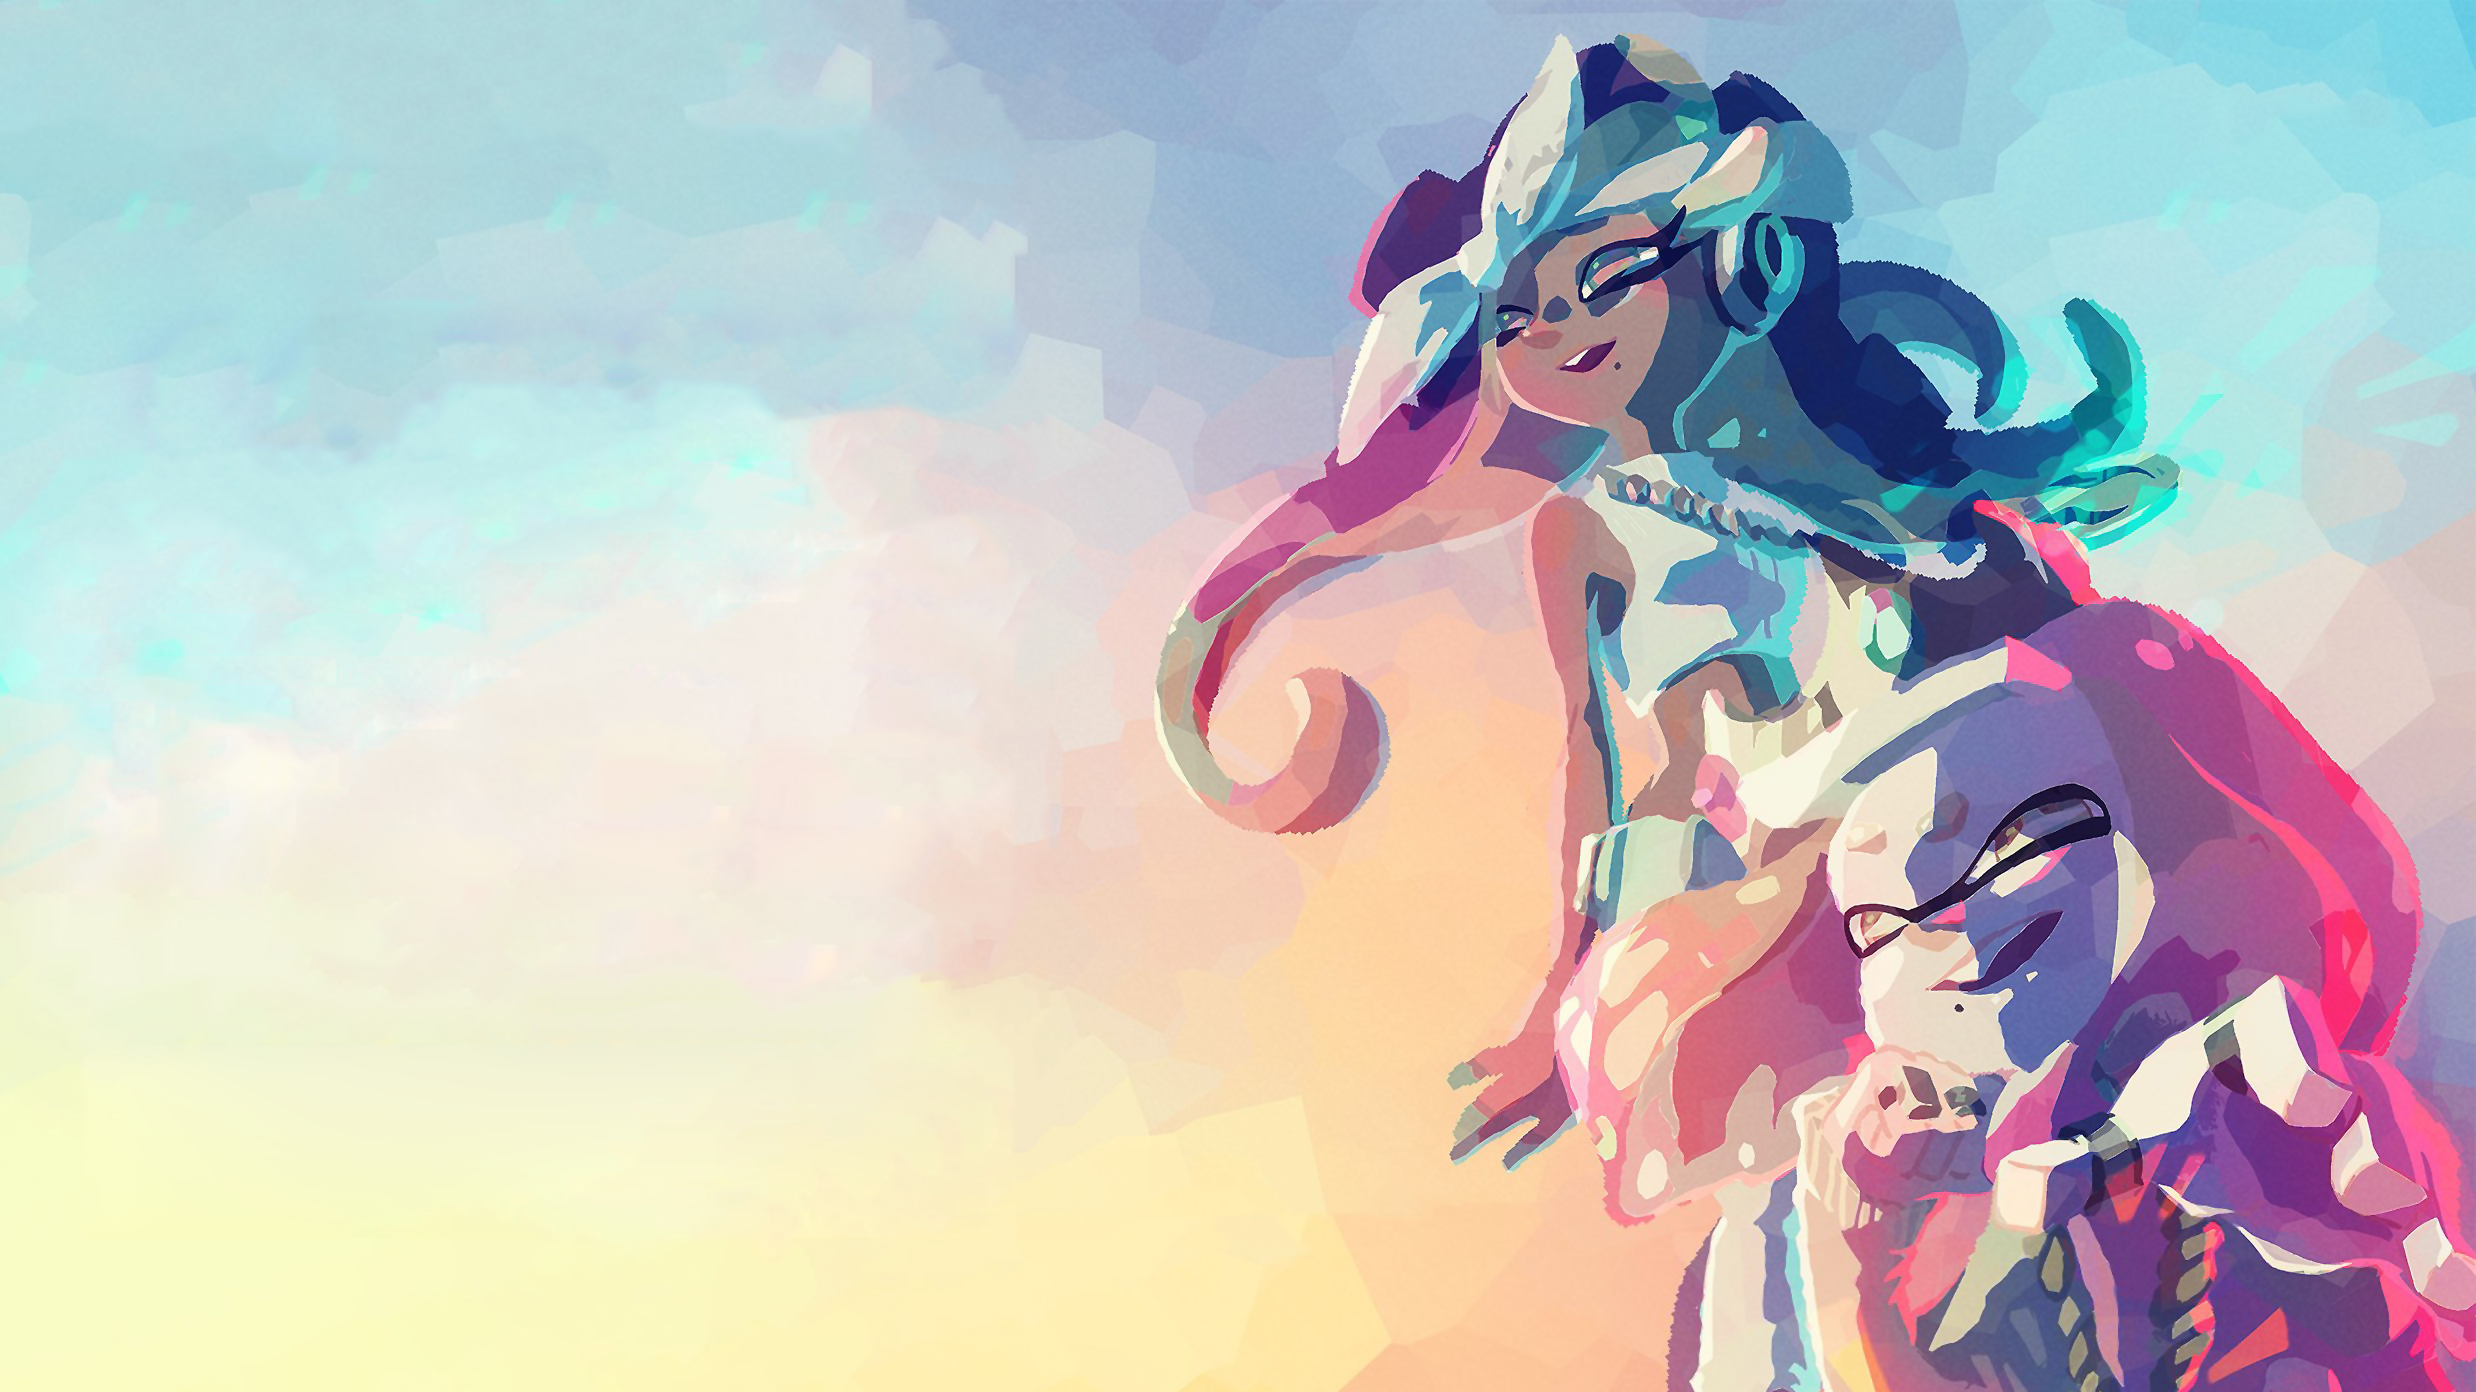 I edited the text out of the Off the Hook concert poster. Enjoy